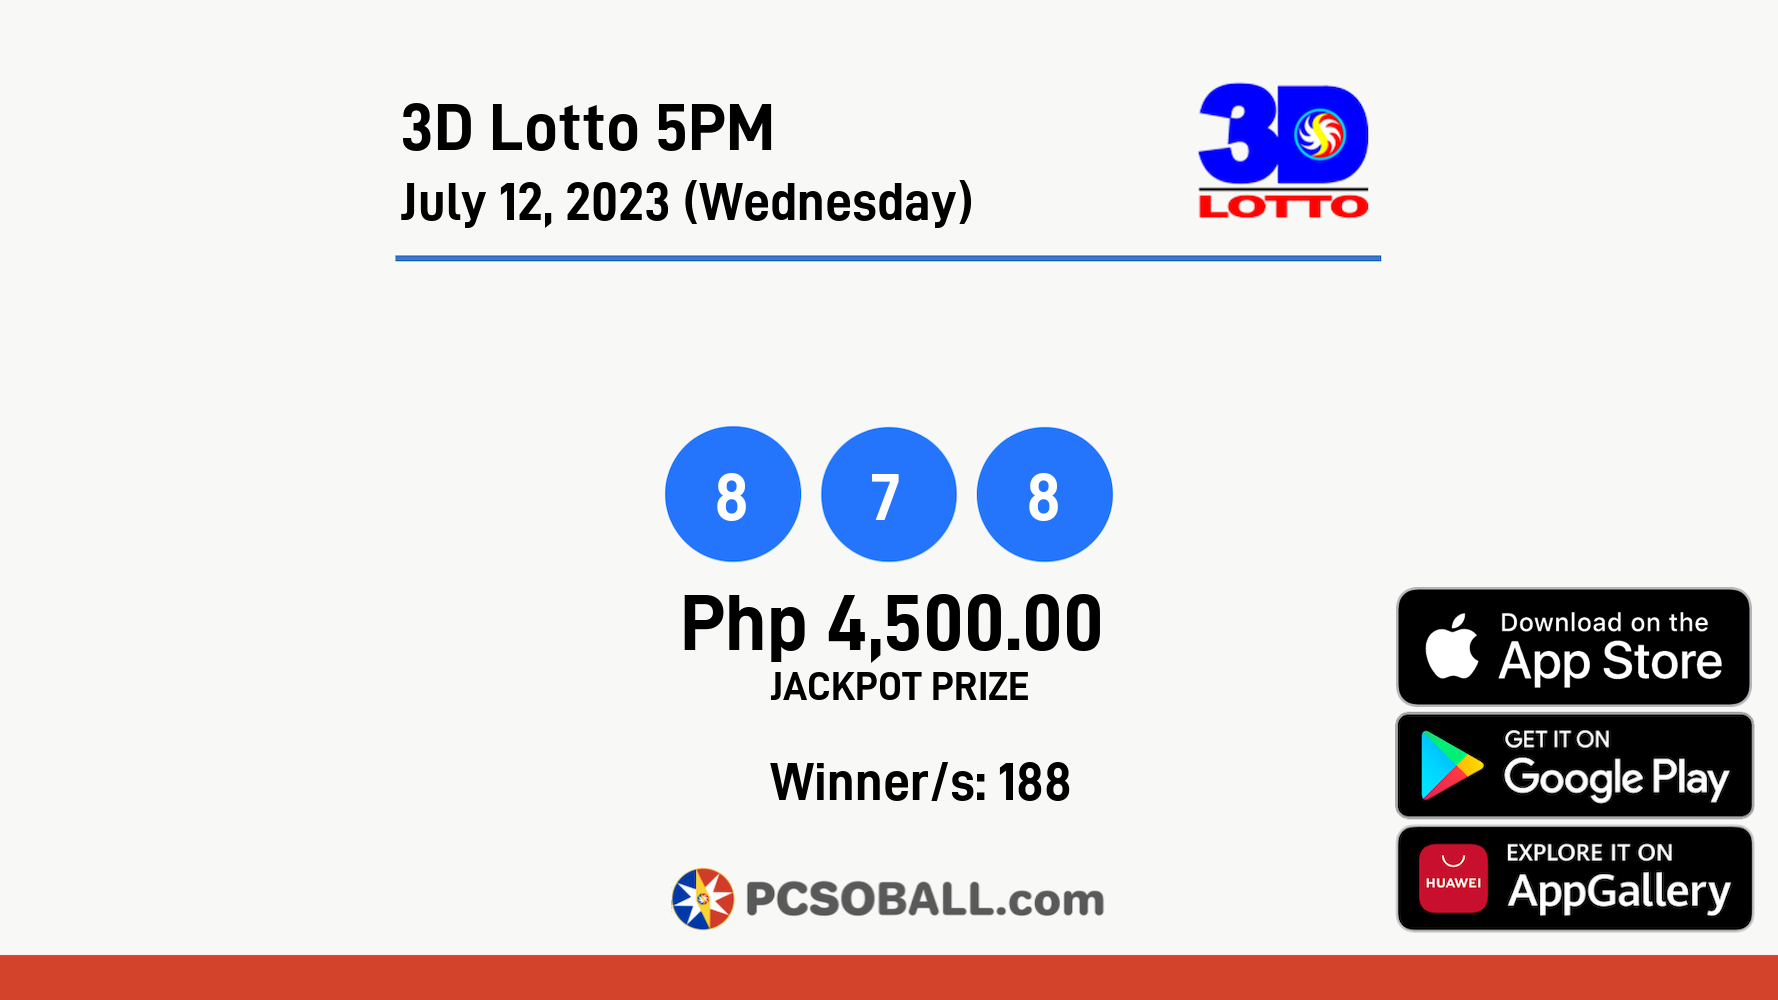 3D Lotto 5PM July 12, 2023 (Wednesday) Result